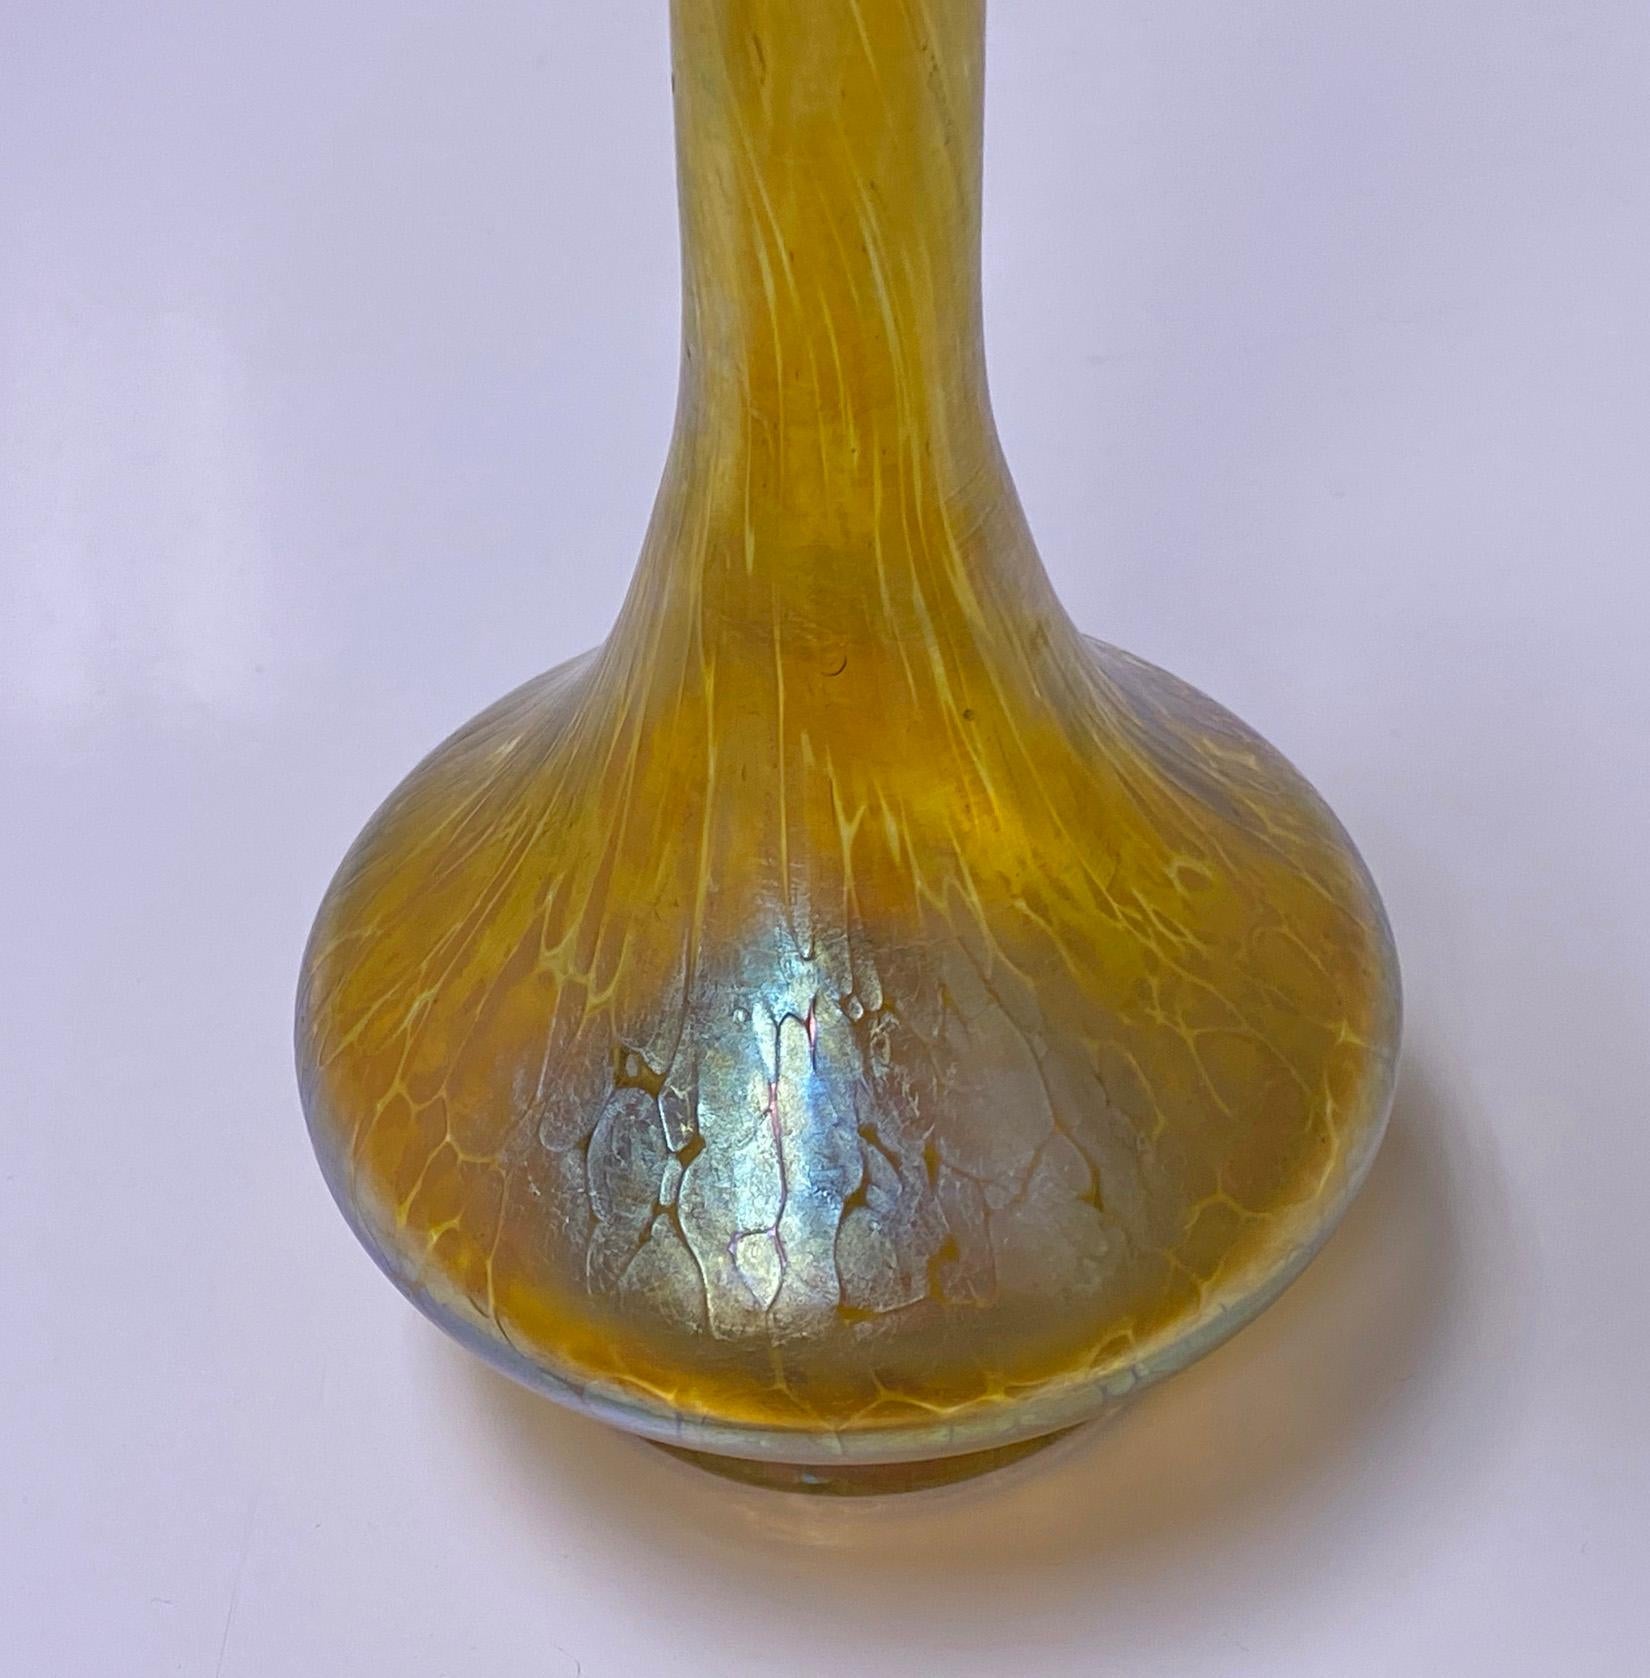 Loetz vase, baluster form, gold and violet iridescence with intricate oil spot pattern. Measures: 8.25”, circa 1900 unsigned.